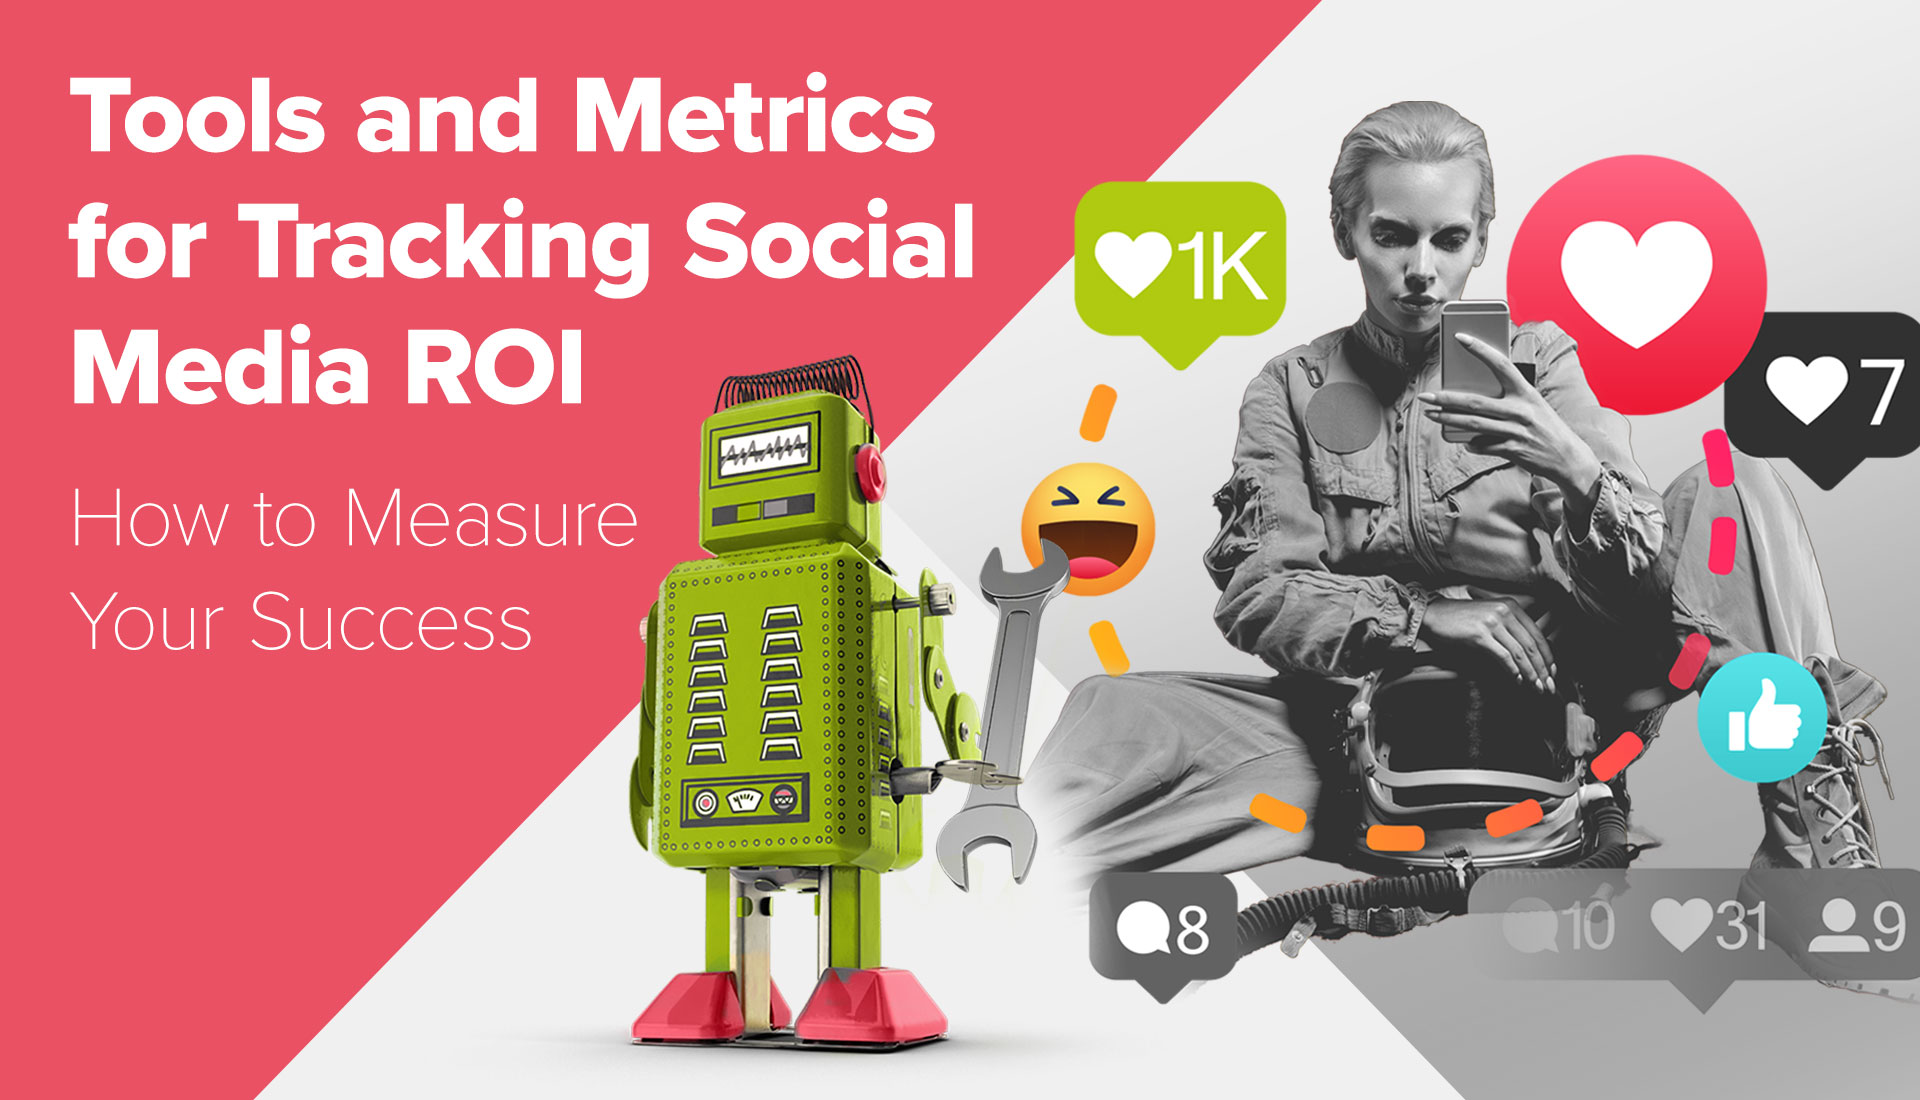 Toy Robot with Fixing Tools and Metrics for Tracking Social Media ROI